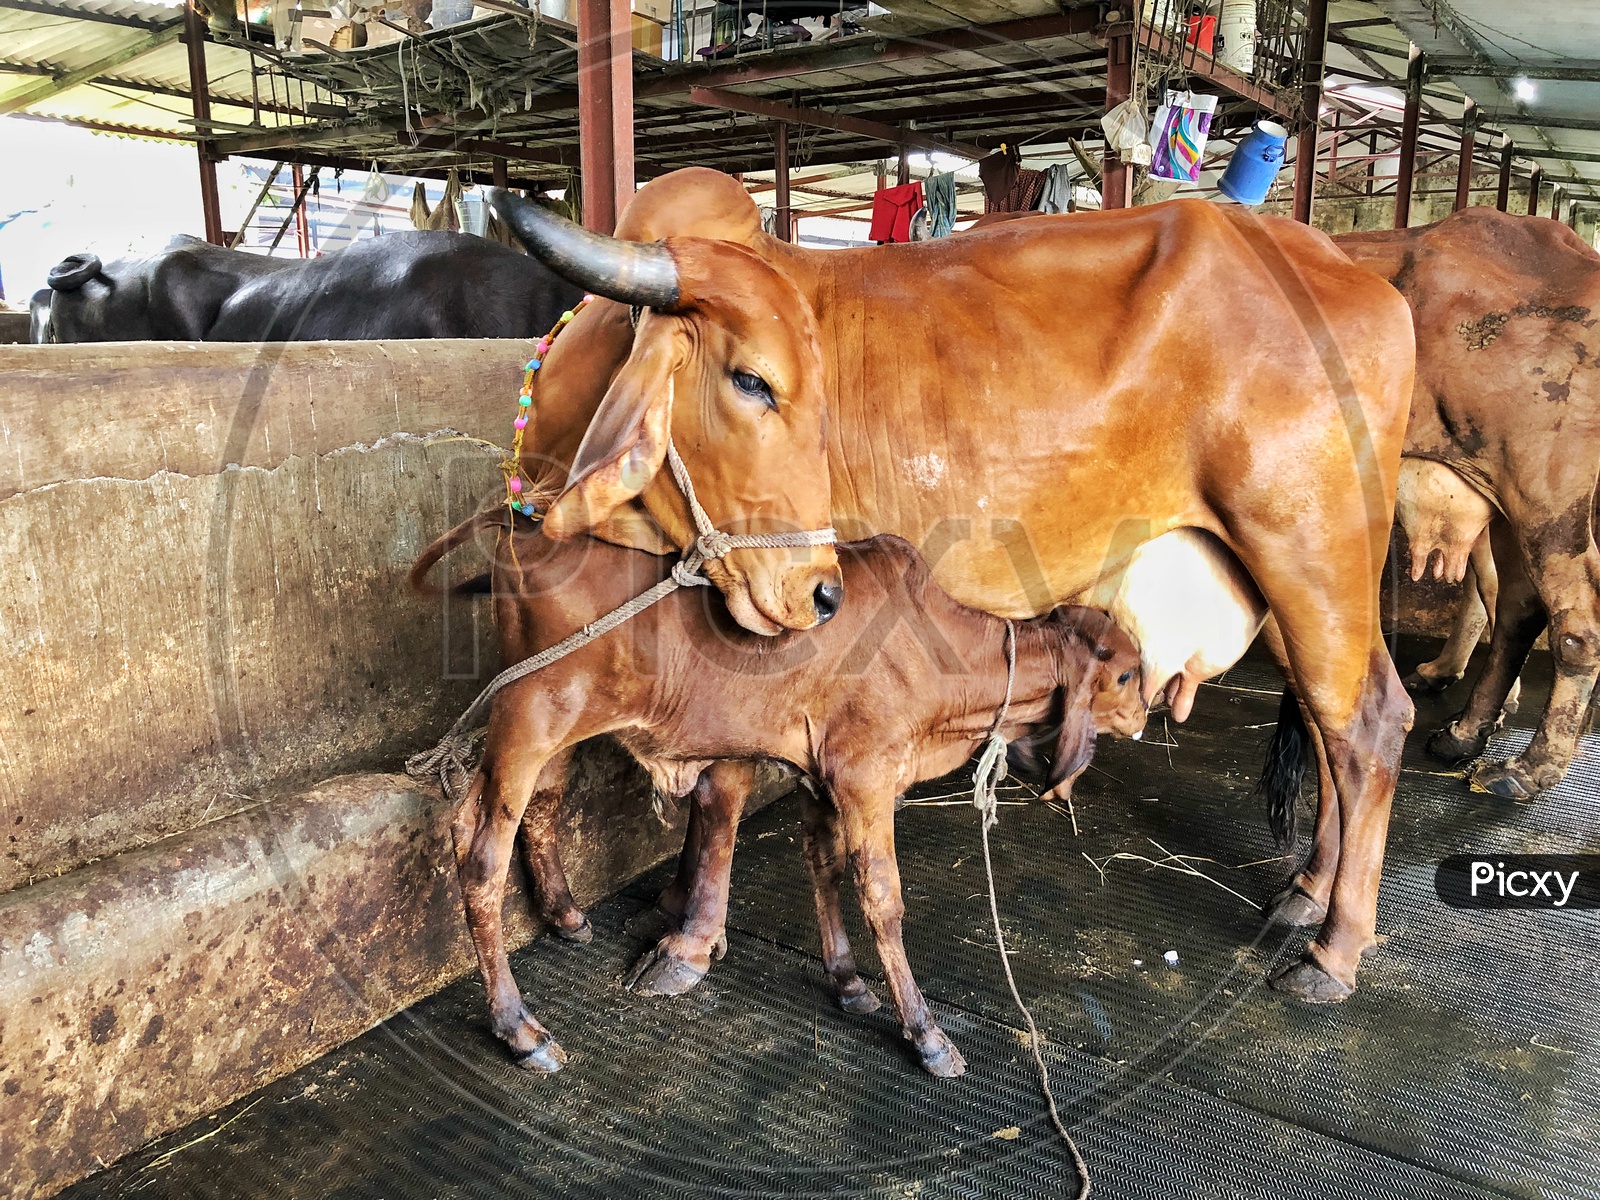 Cow Milking Calf in a Cattle Shed